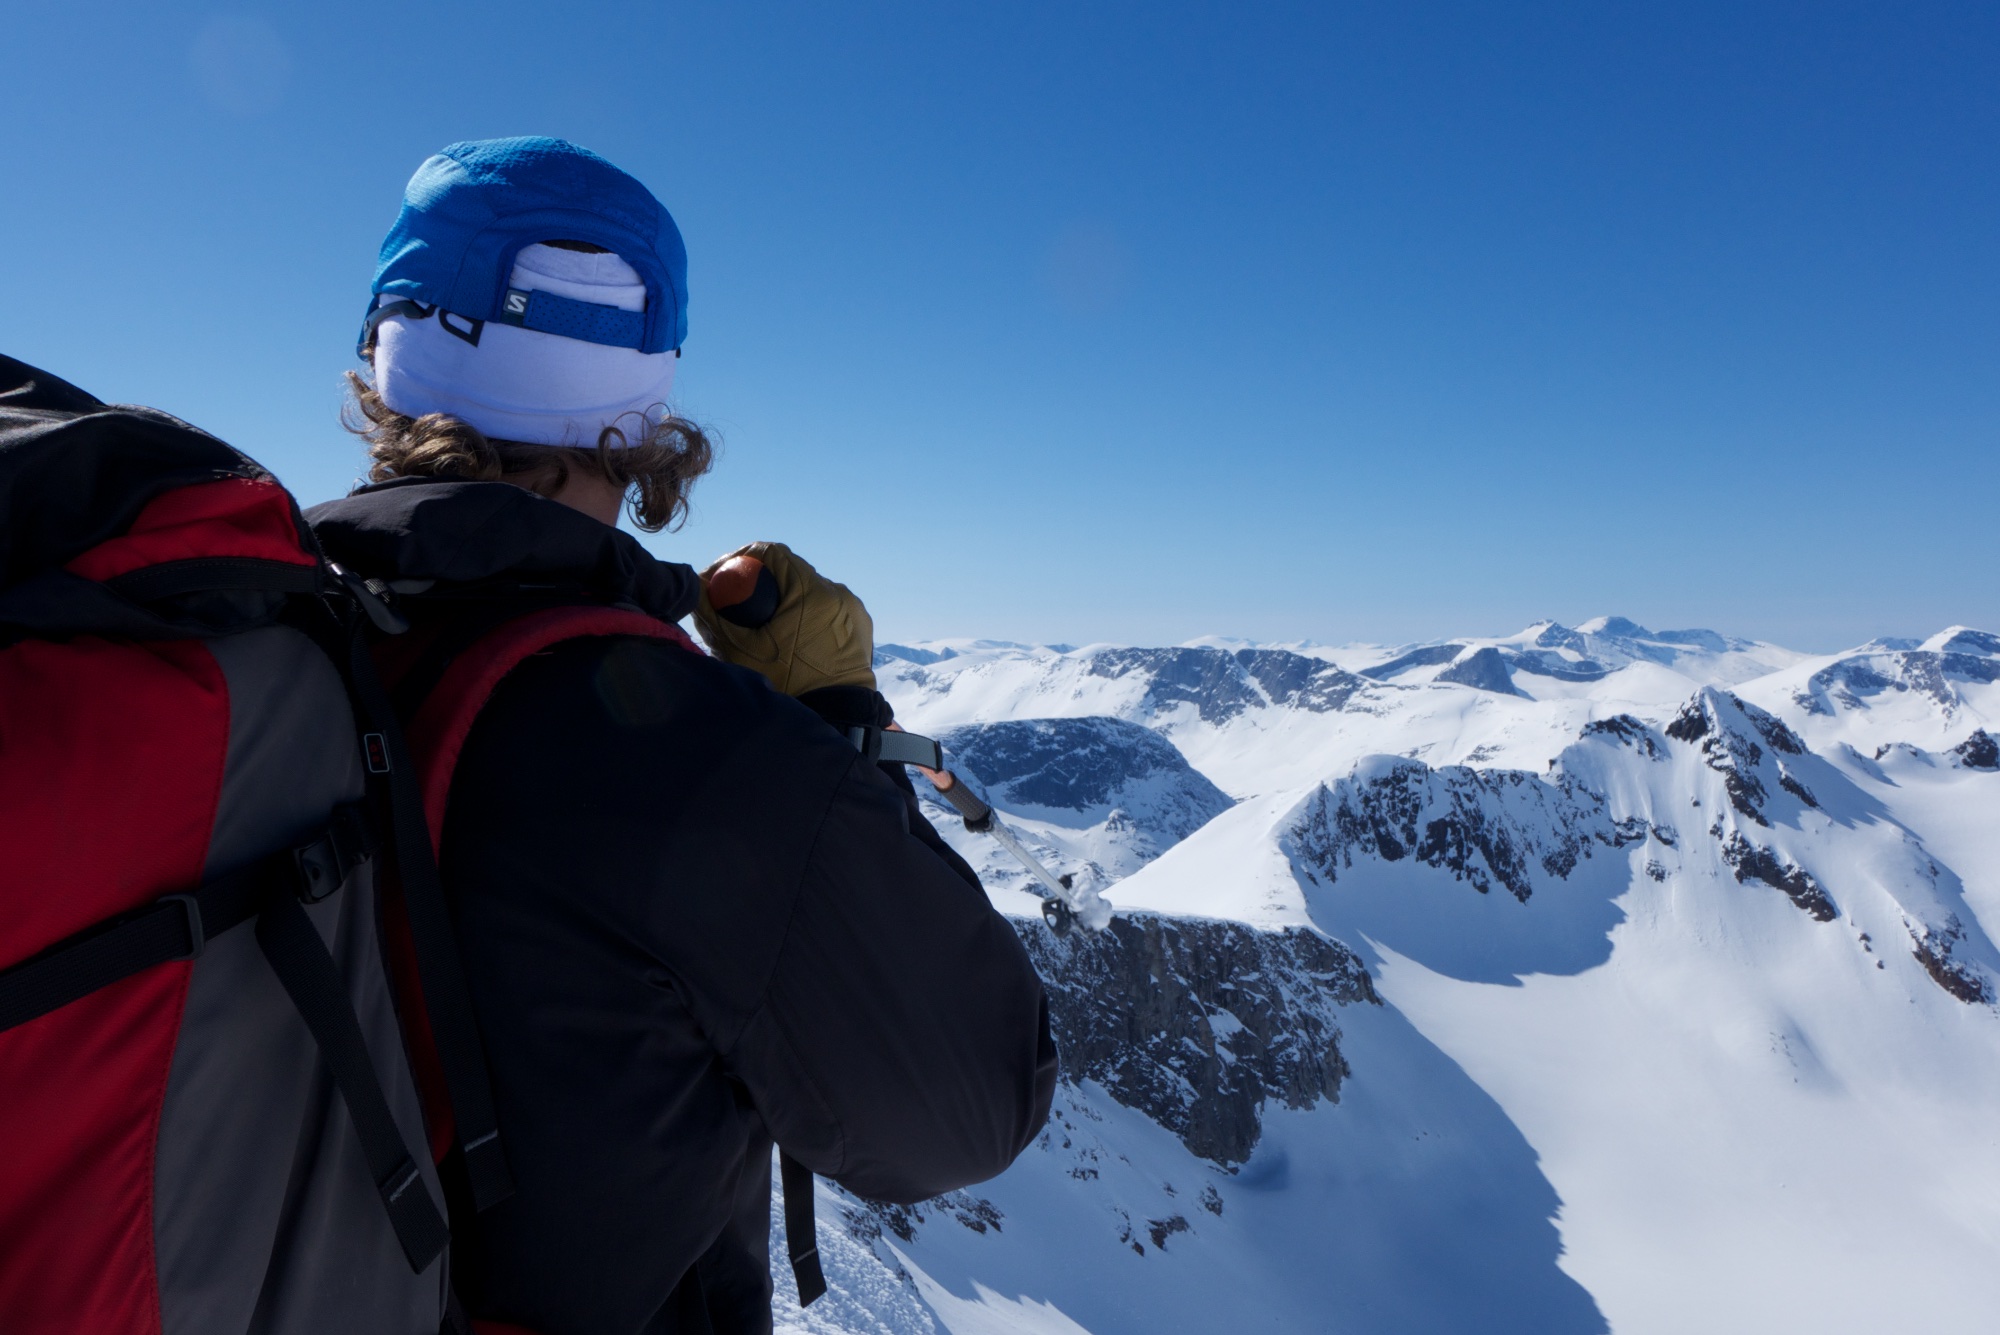 Great views of endless possibilities. Mattias is pointing towards Järnkammen, our objective for the day.